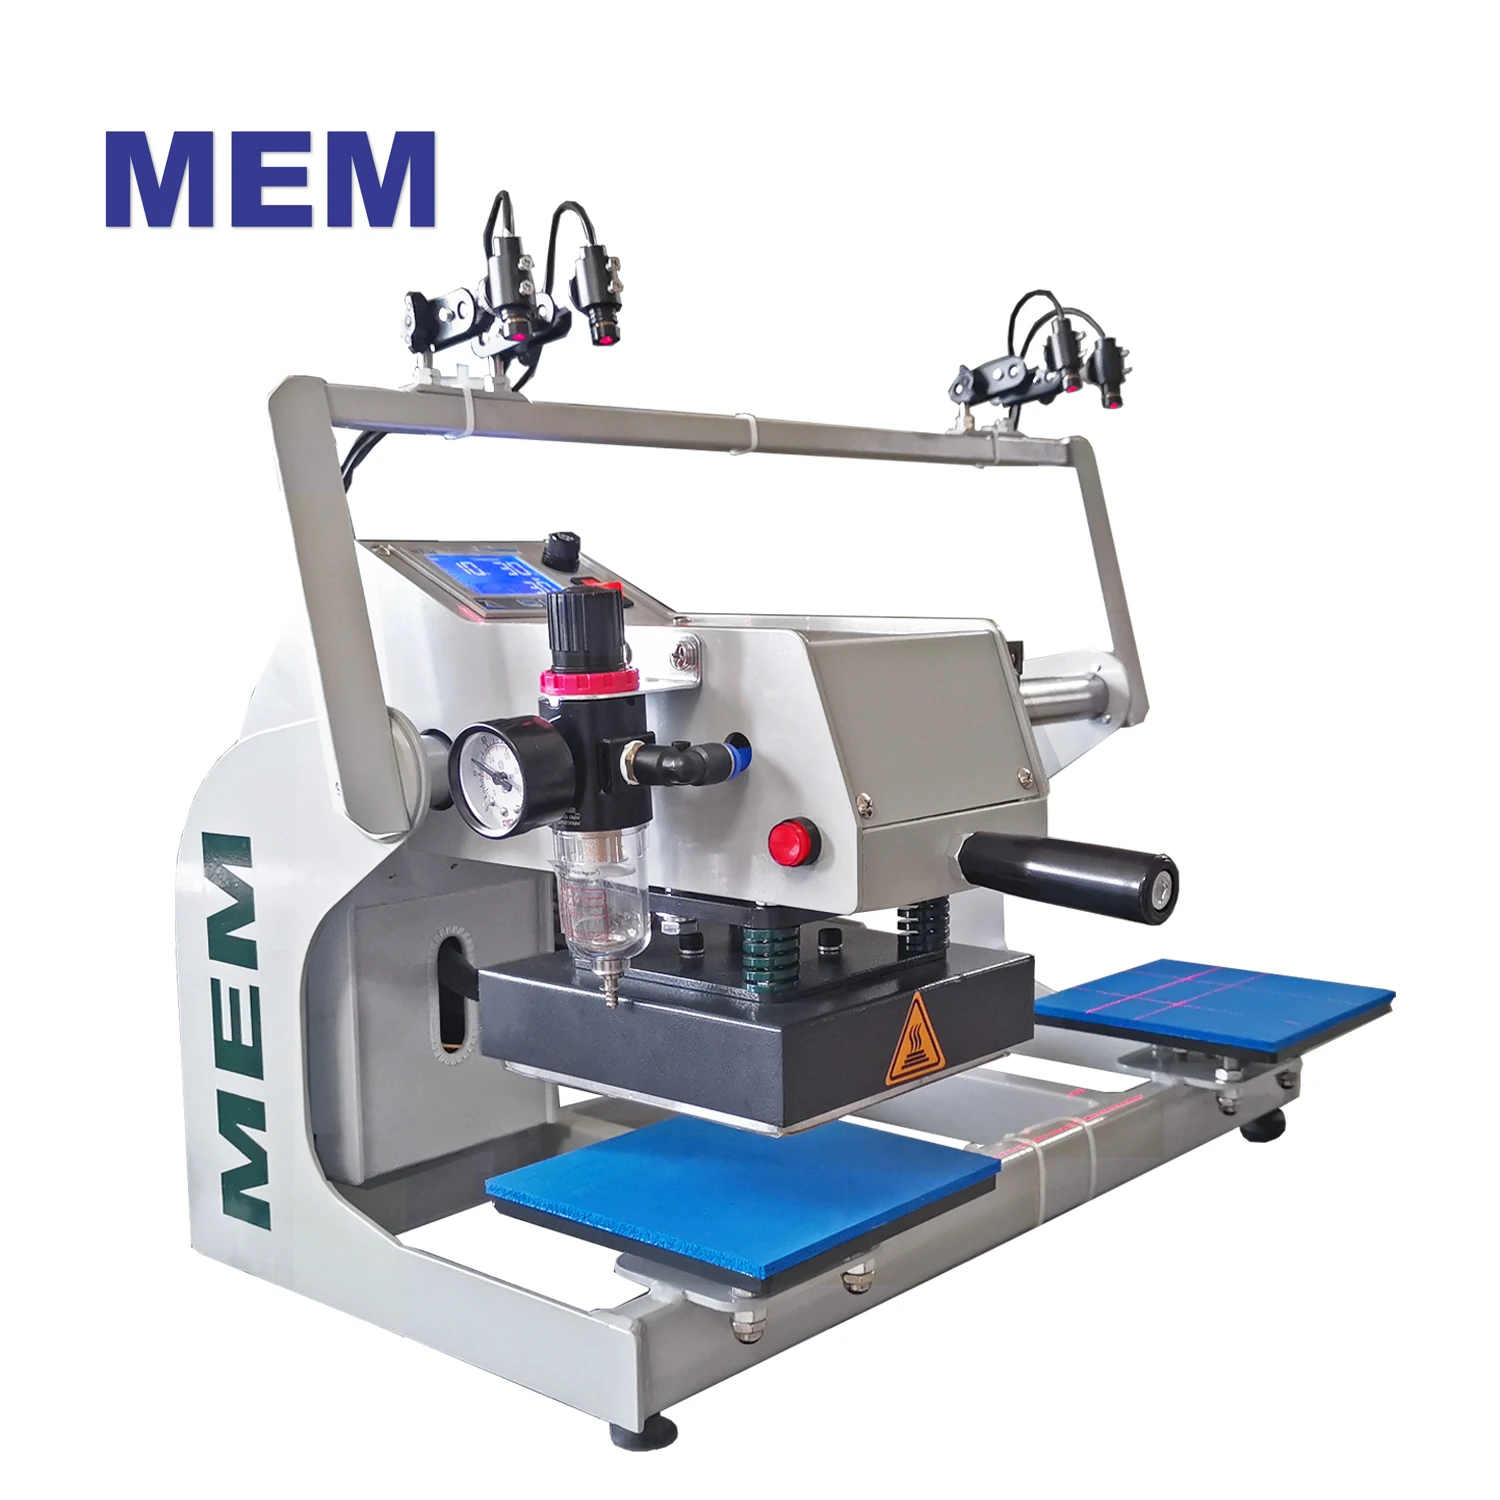 

US warehouse free shipment MEM 6*6 inch double pneumatic t shirt collar pressing machine for factory or home use with red light